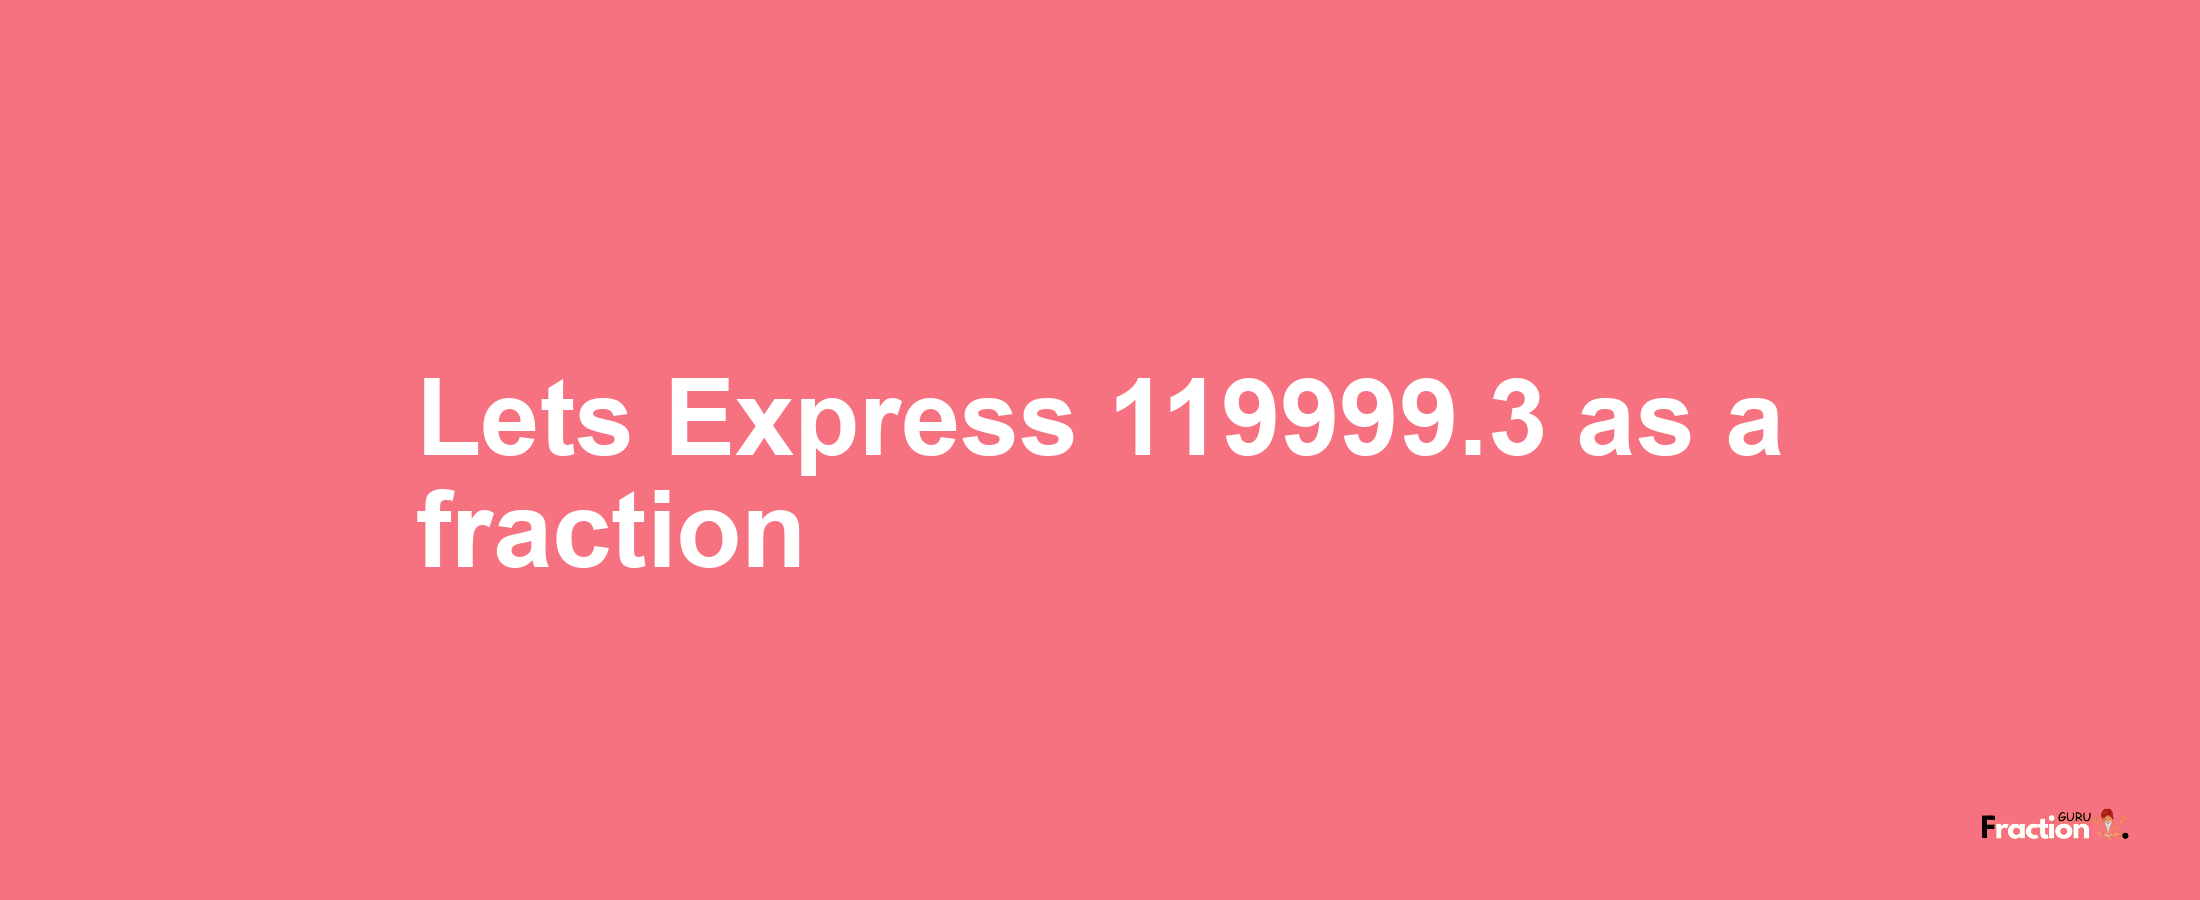 Lets Express 119999.3 as afraction